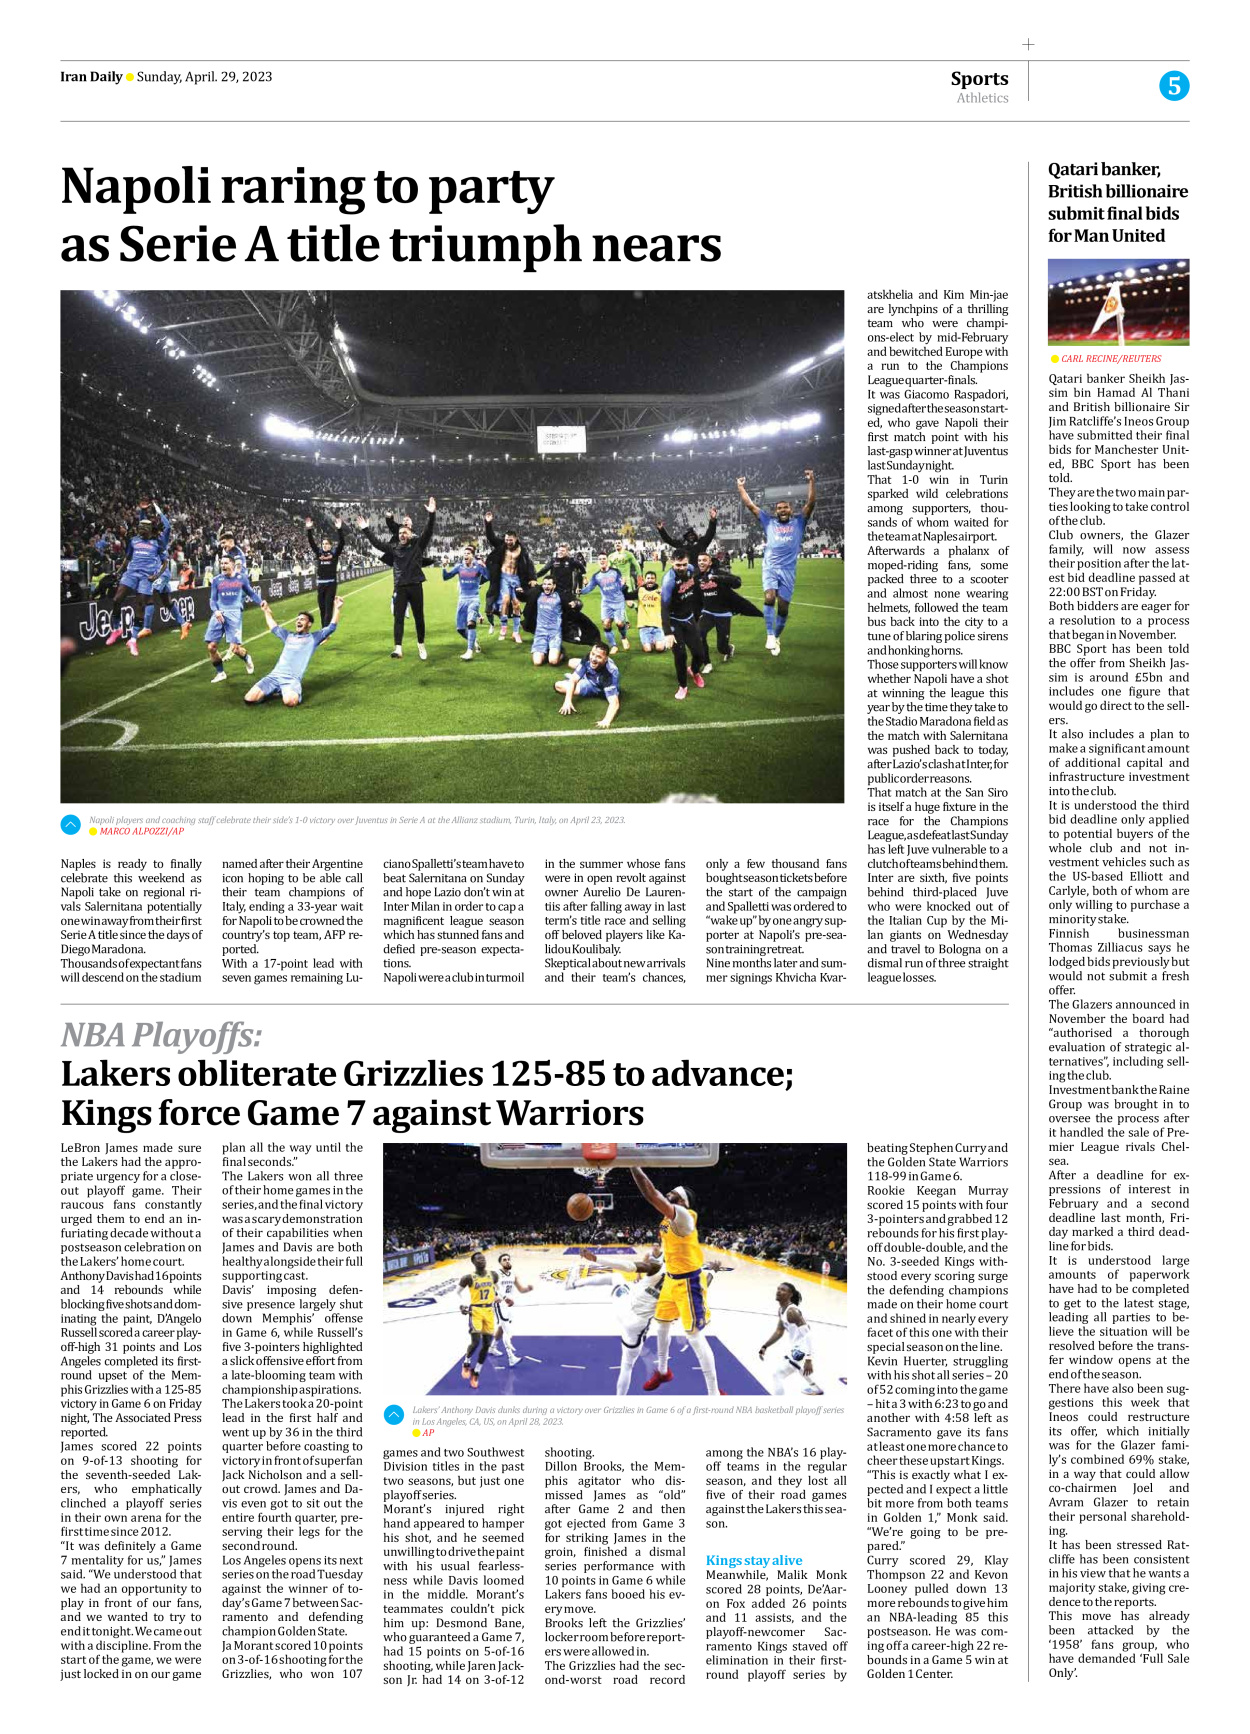 Iran Daily - Number Seven Thousand Two Hundred and Seventy Nine - 30 April 2023 - Page 5